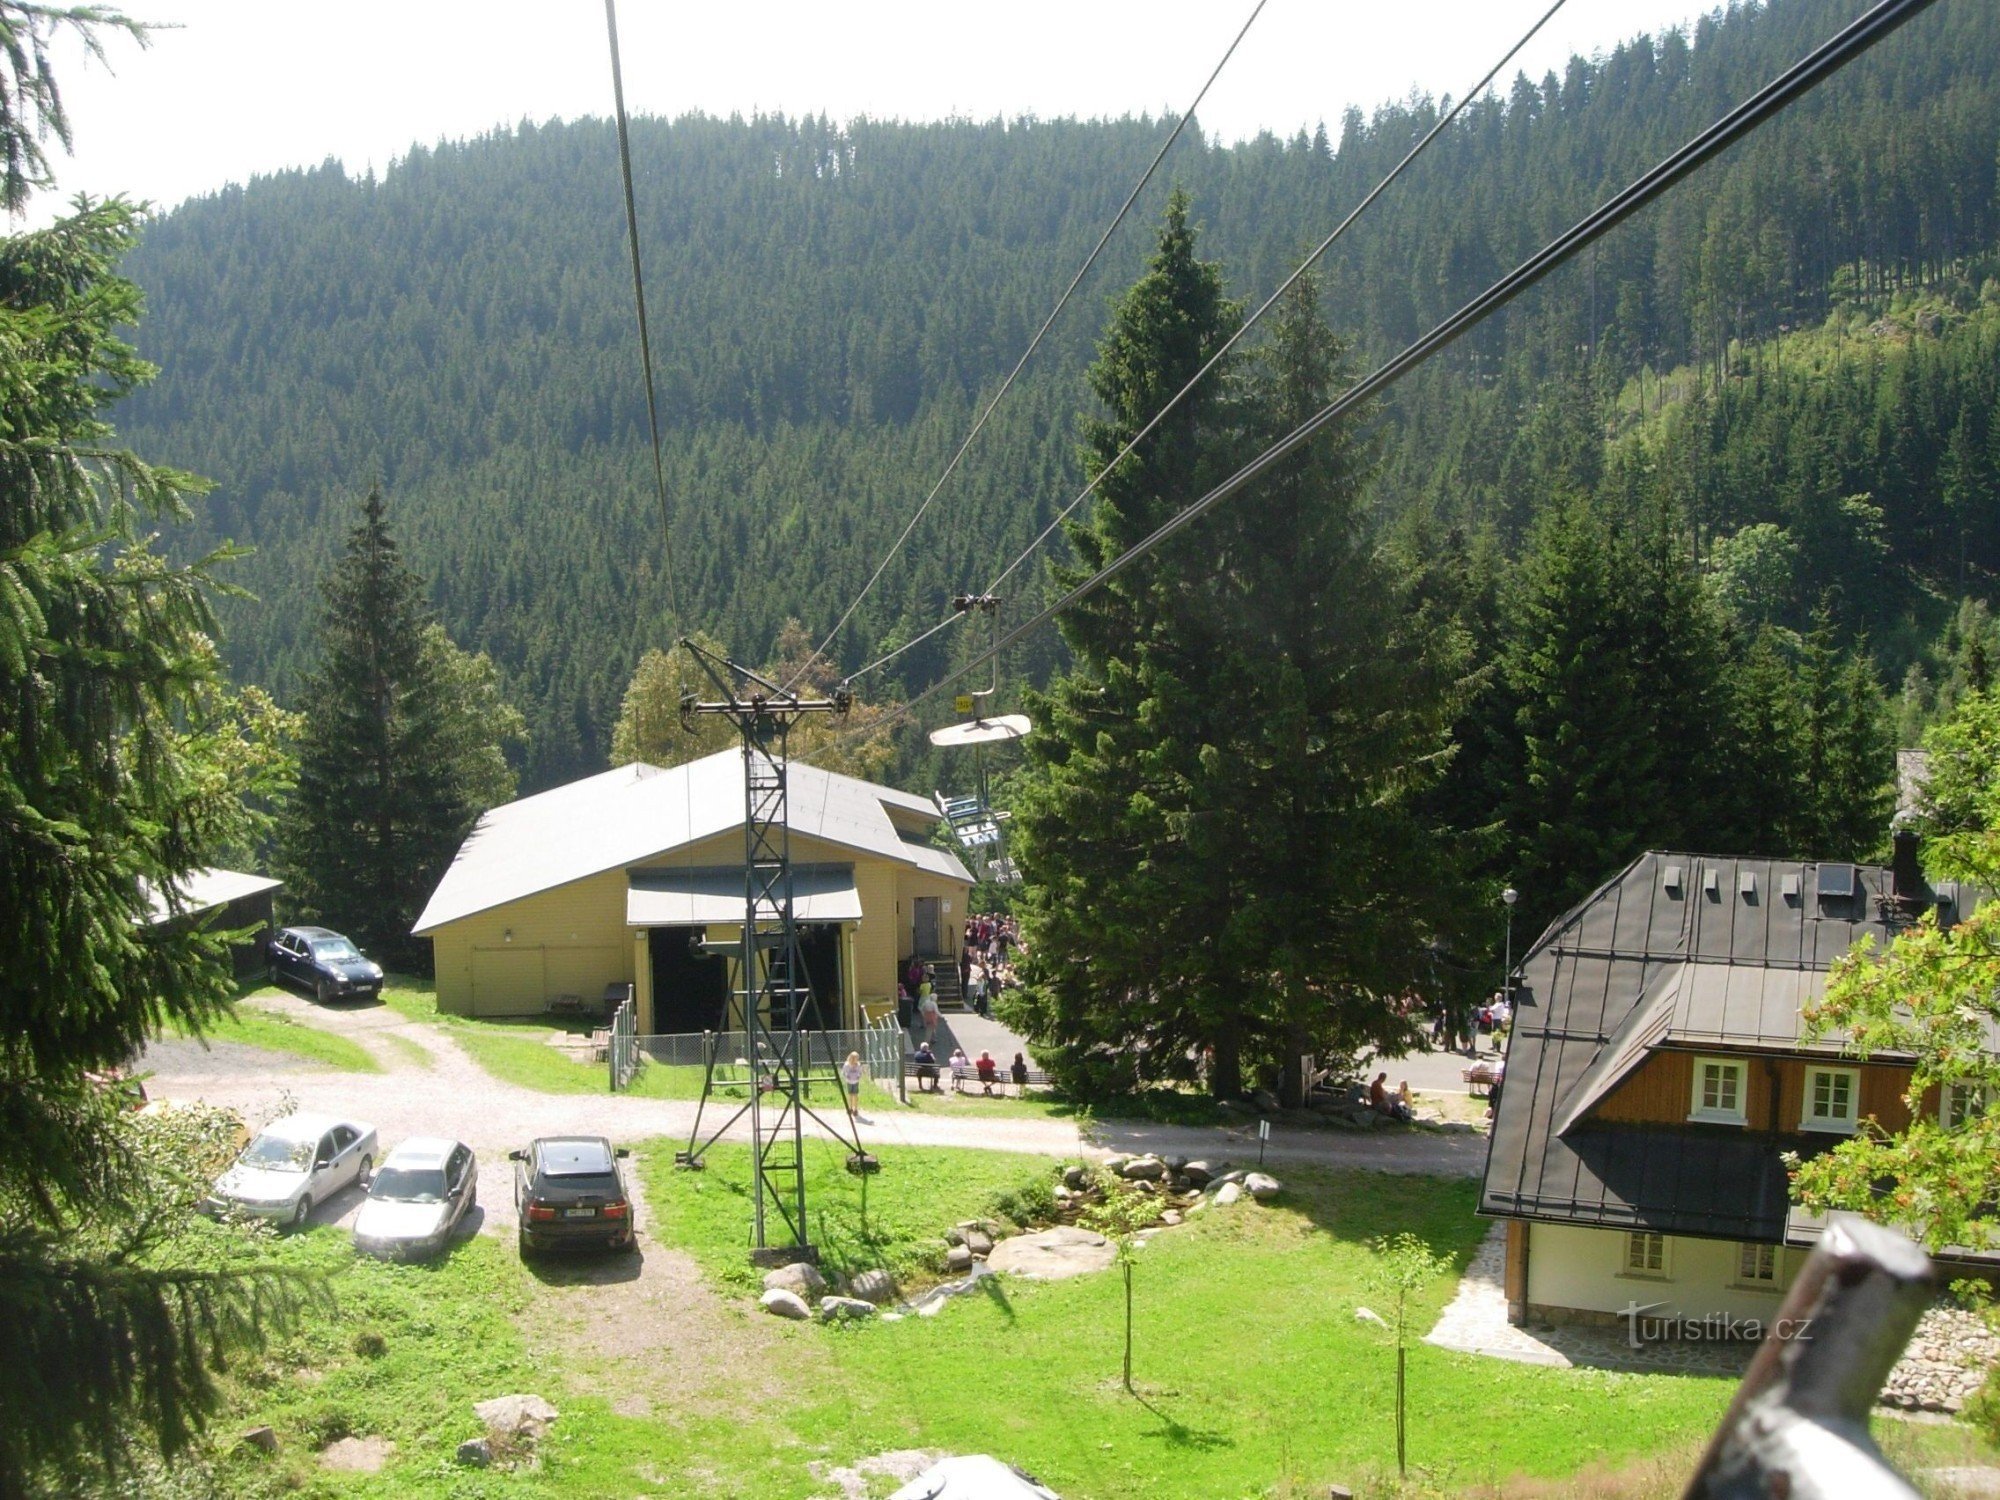 The lower station of the cable car in Pec pod Sněžkou